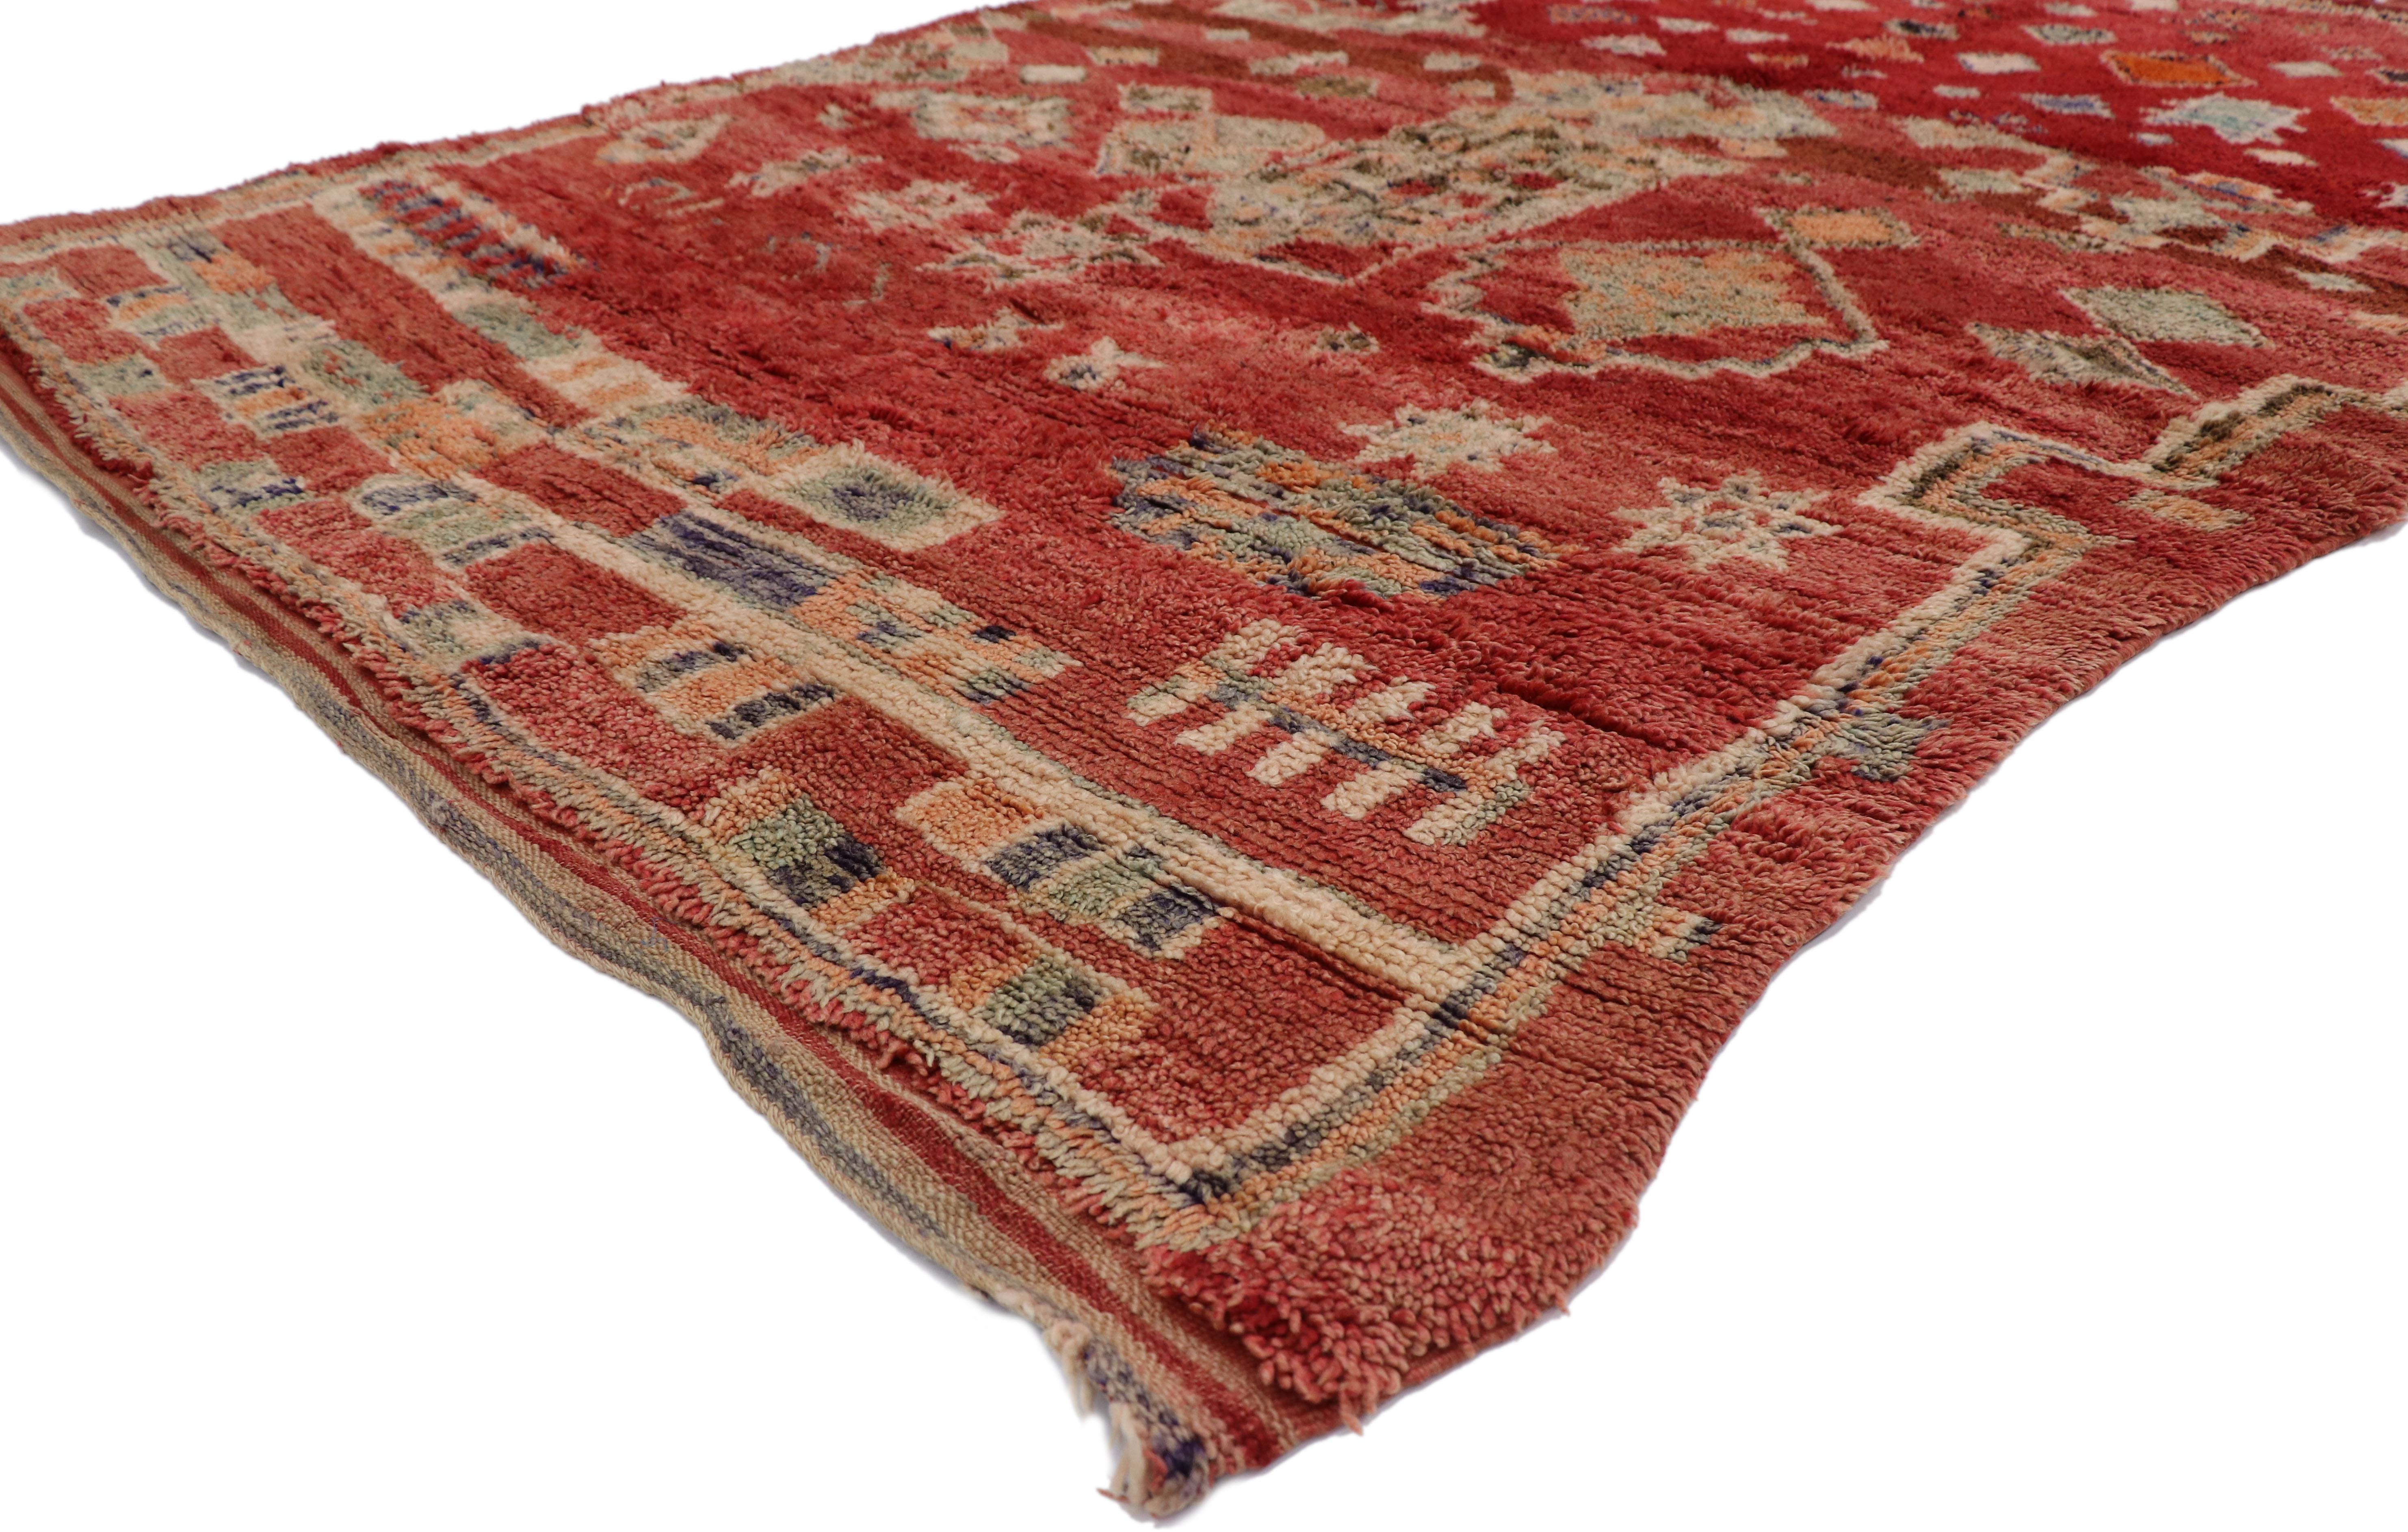 21323 Vintage Red Moroccan Rug, 05'09 x 08'05.
Reflecting elements of Wabi-Sabi and nomadic charm, this hand knotted wool vintage Moroccan rug is a captivating vision of woven beauty. The perfectly imperfect tribal design and vibrant colors woven